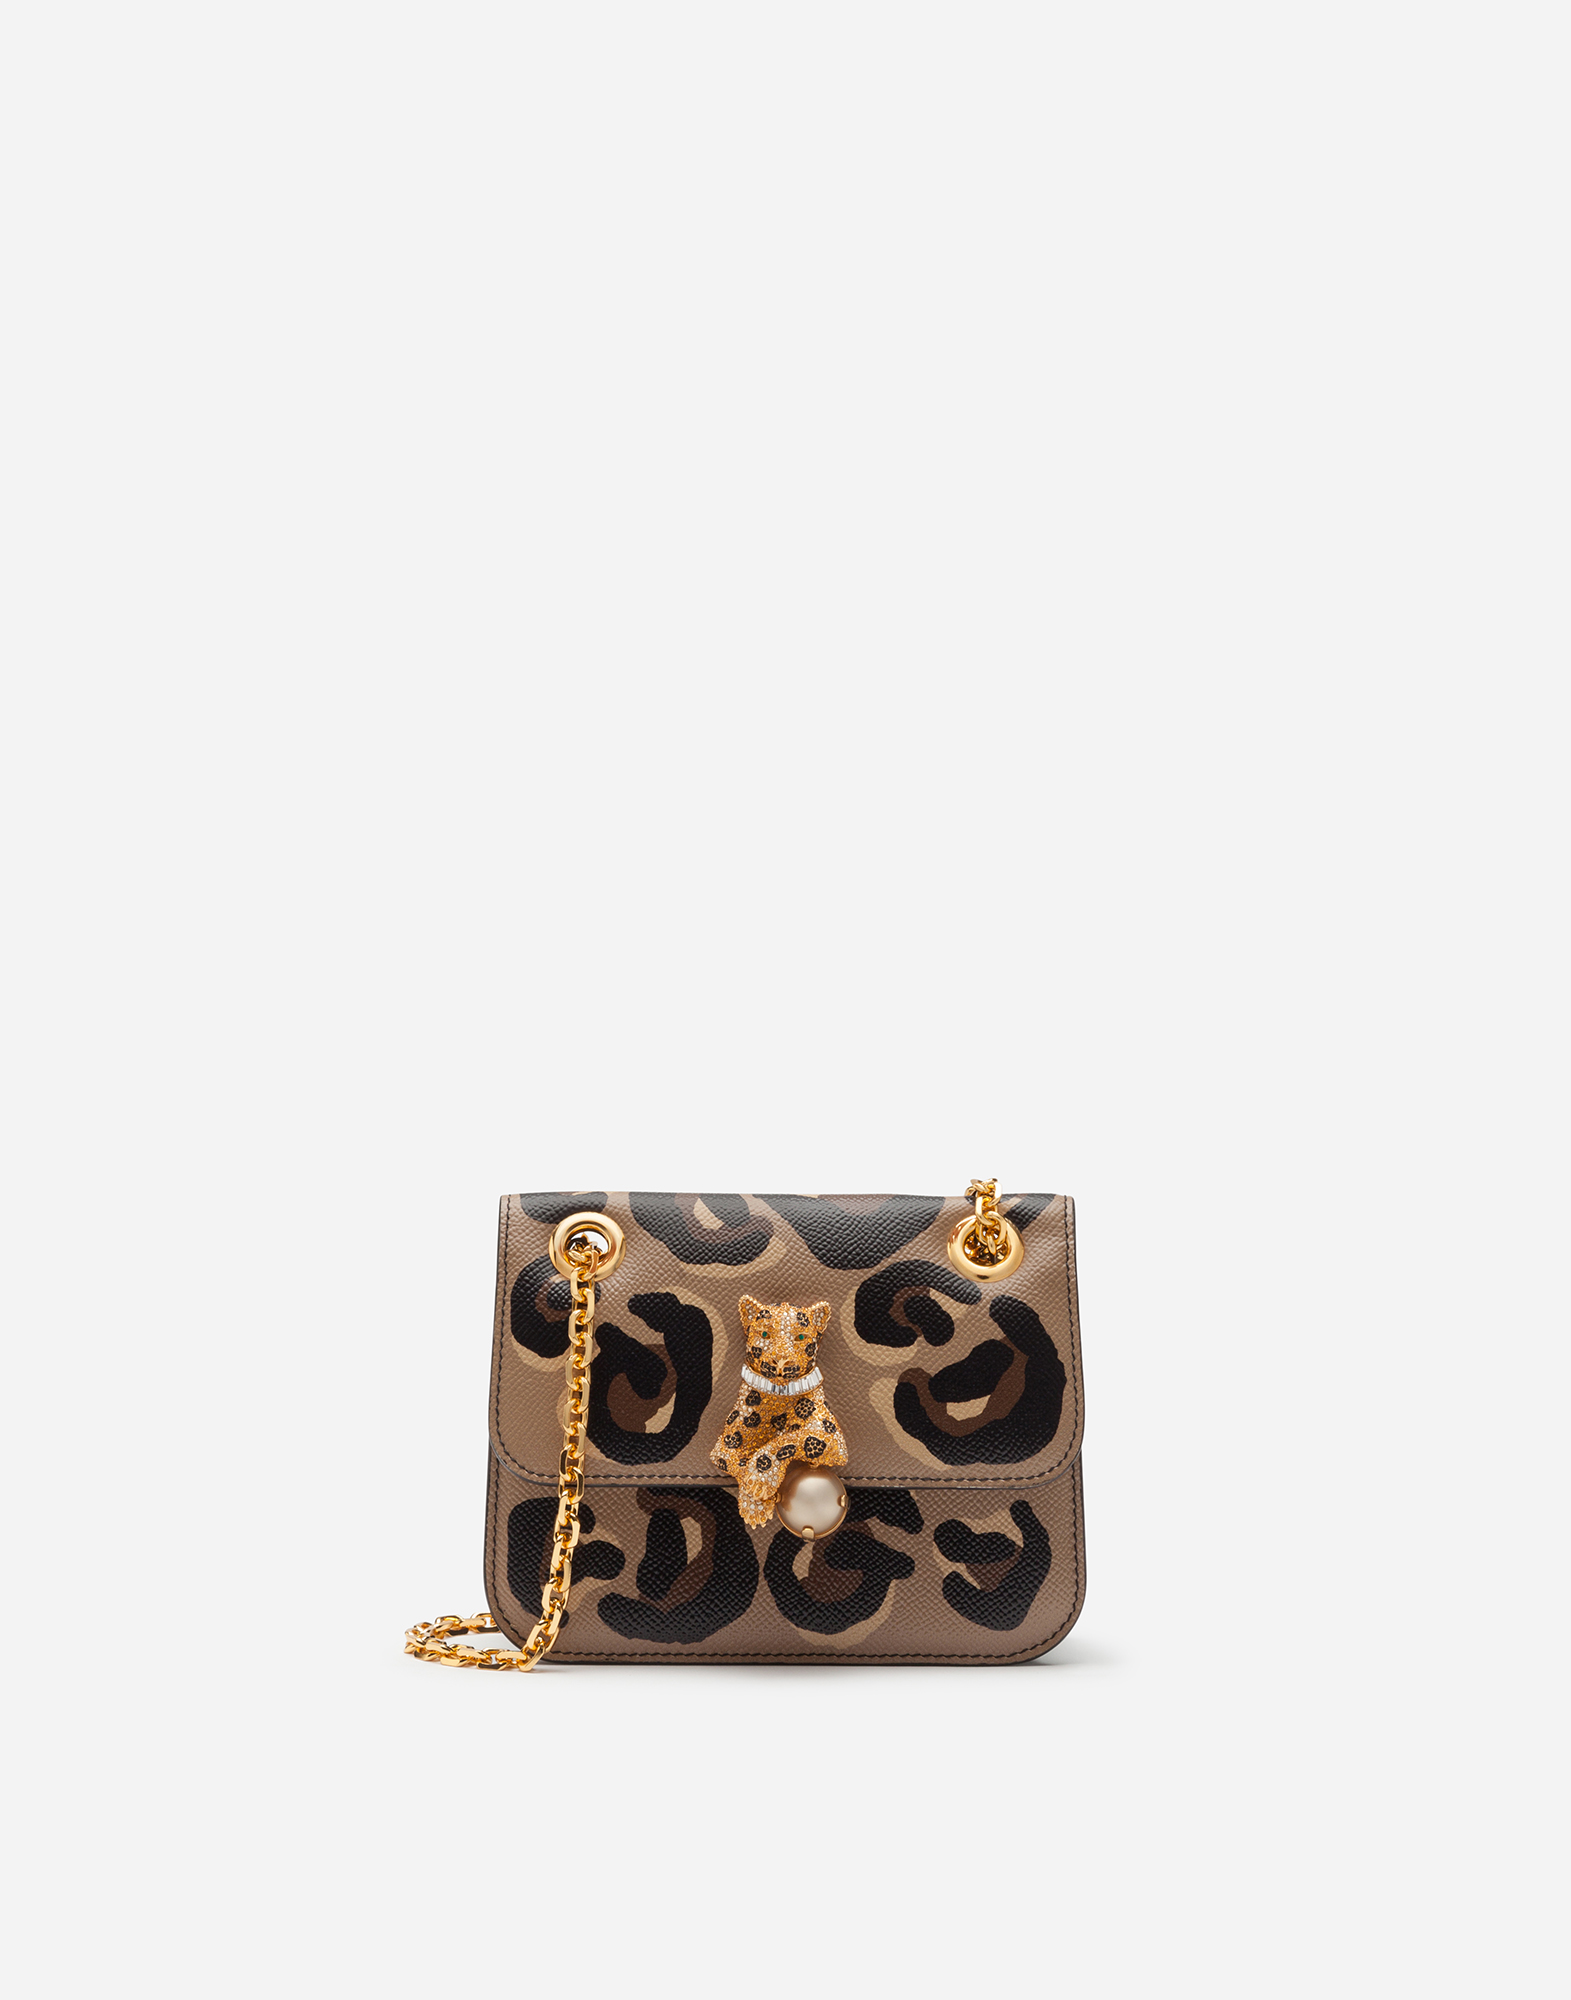 DOLCE & GABBANA SMALL JUNGLE BAG IN CALFSKIN WITH DG LEO PRINT AND BEJEWELED CLOSURE